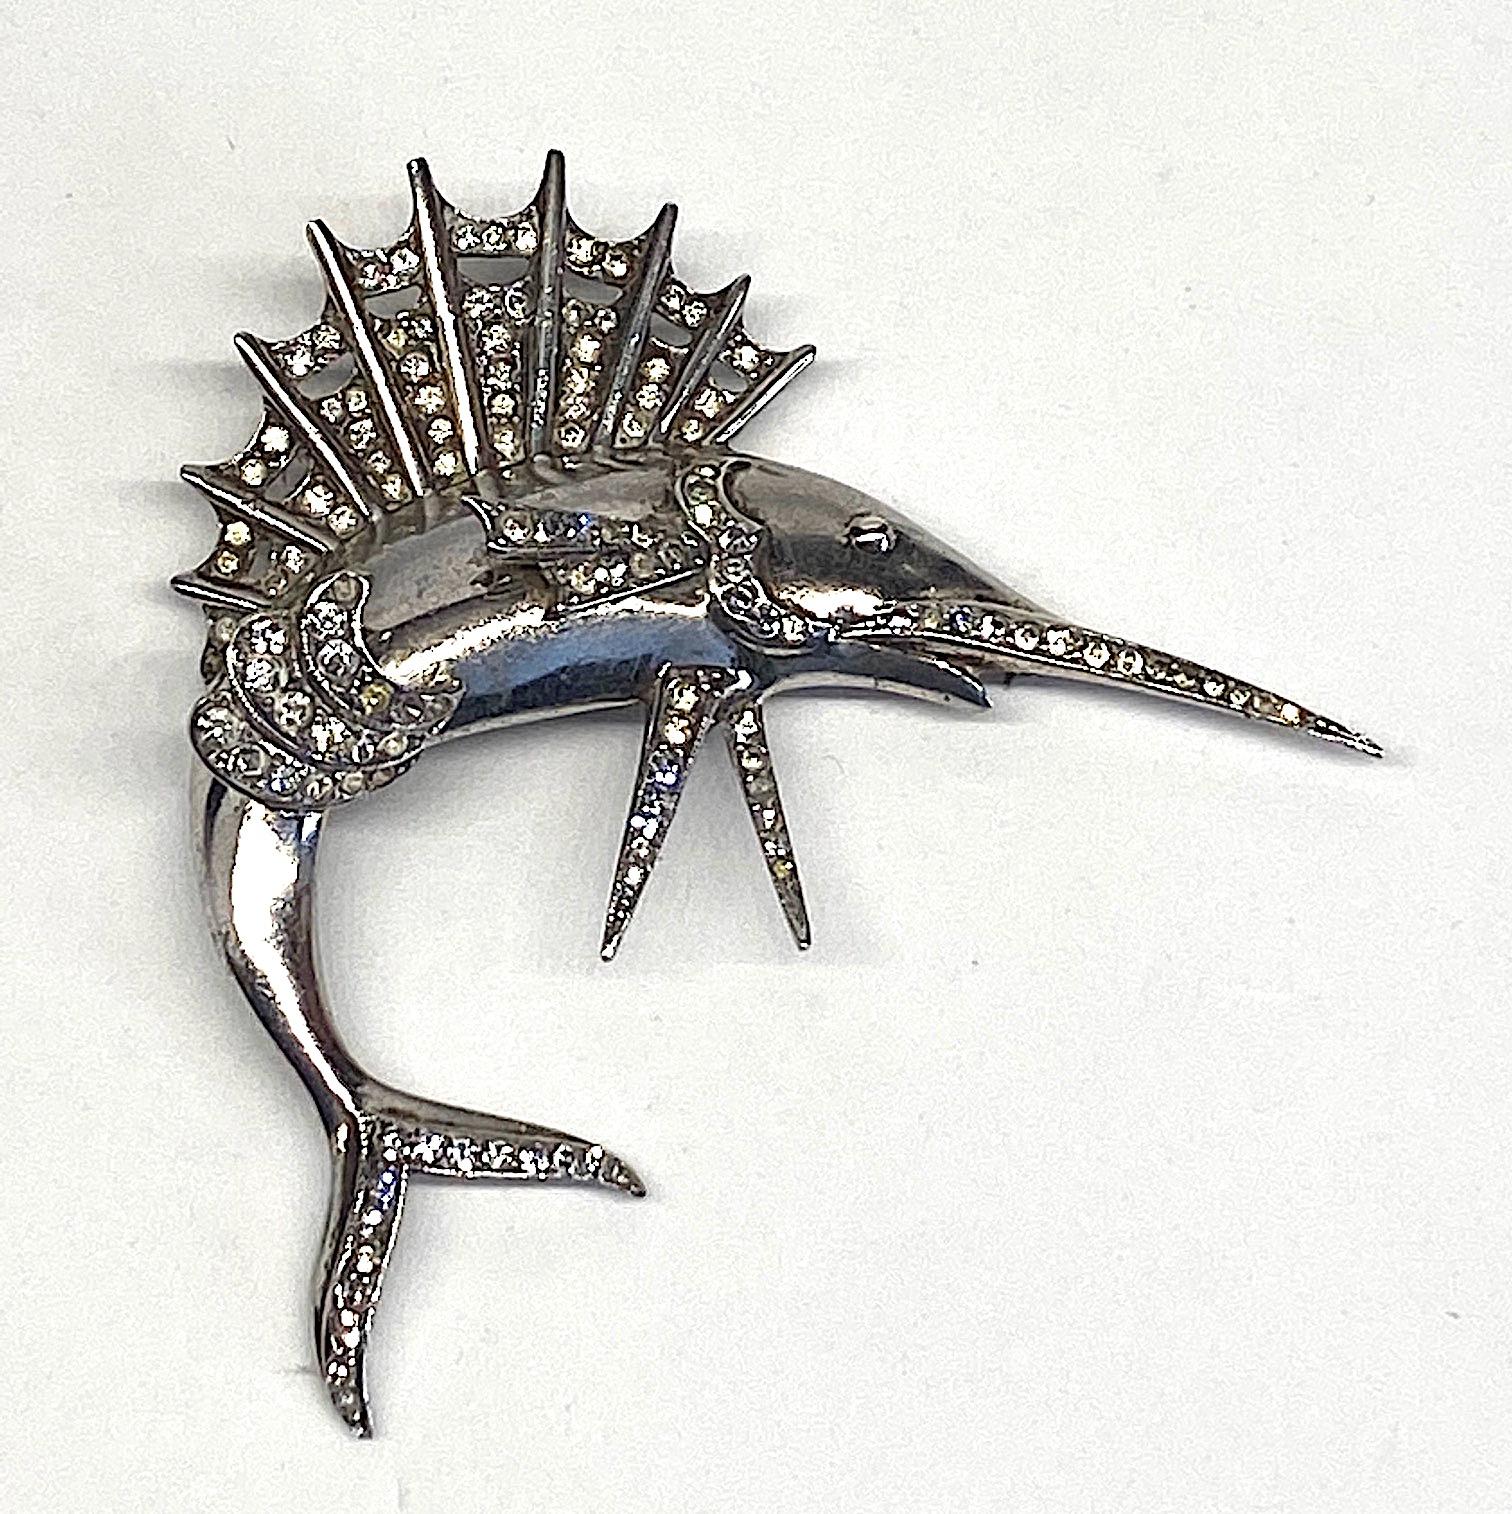 A lovely sterling silver and rhodium plate 1940s sailfish brooch. The body and fins are cast separately in sterling silver, hand soldered together. and then rhodium plated The fins, tail and sword are hand set with rhinestones. The brooch measures